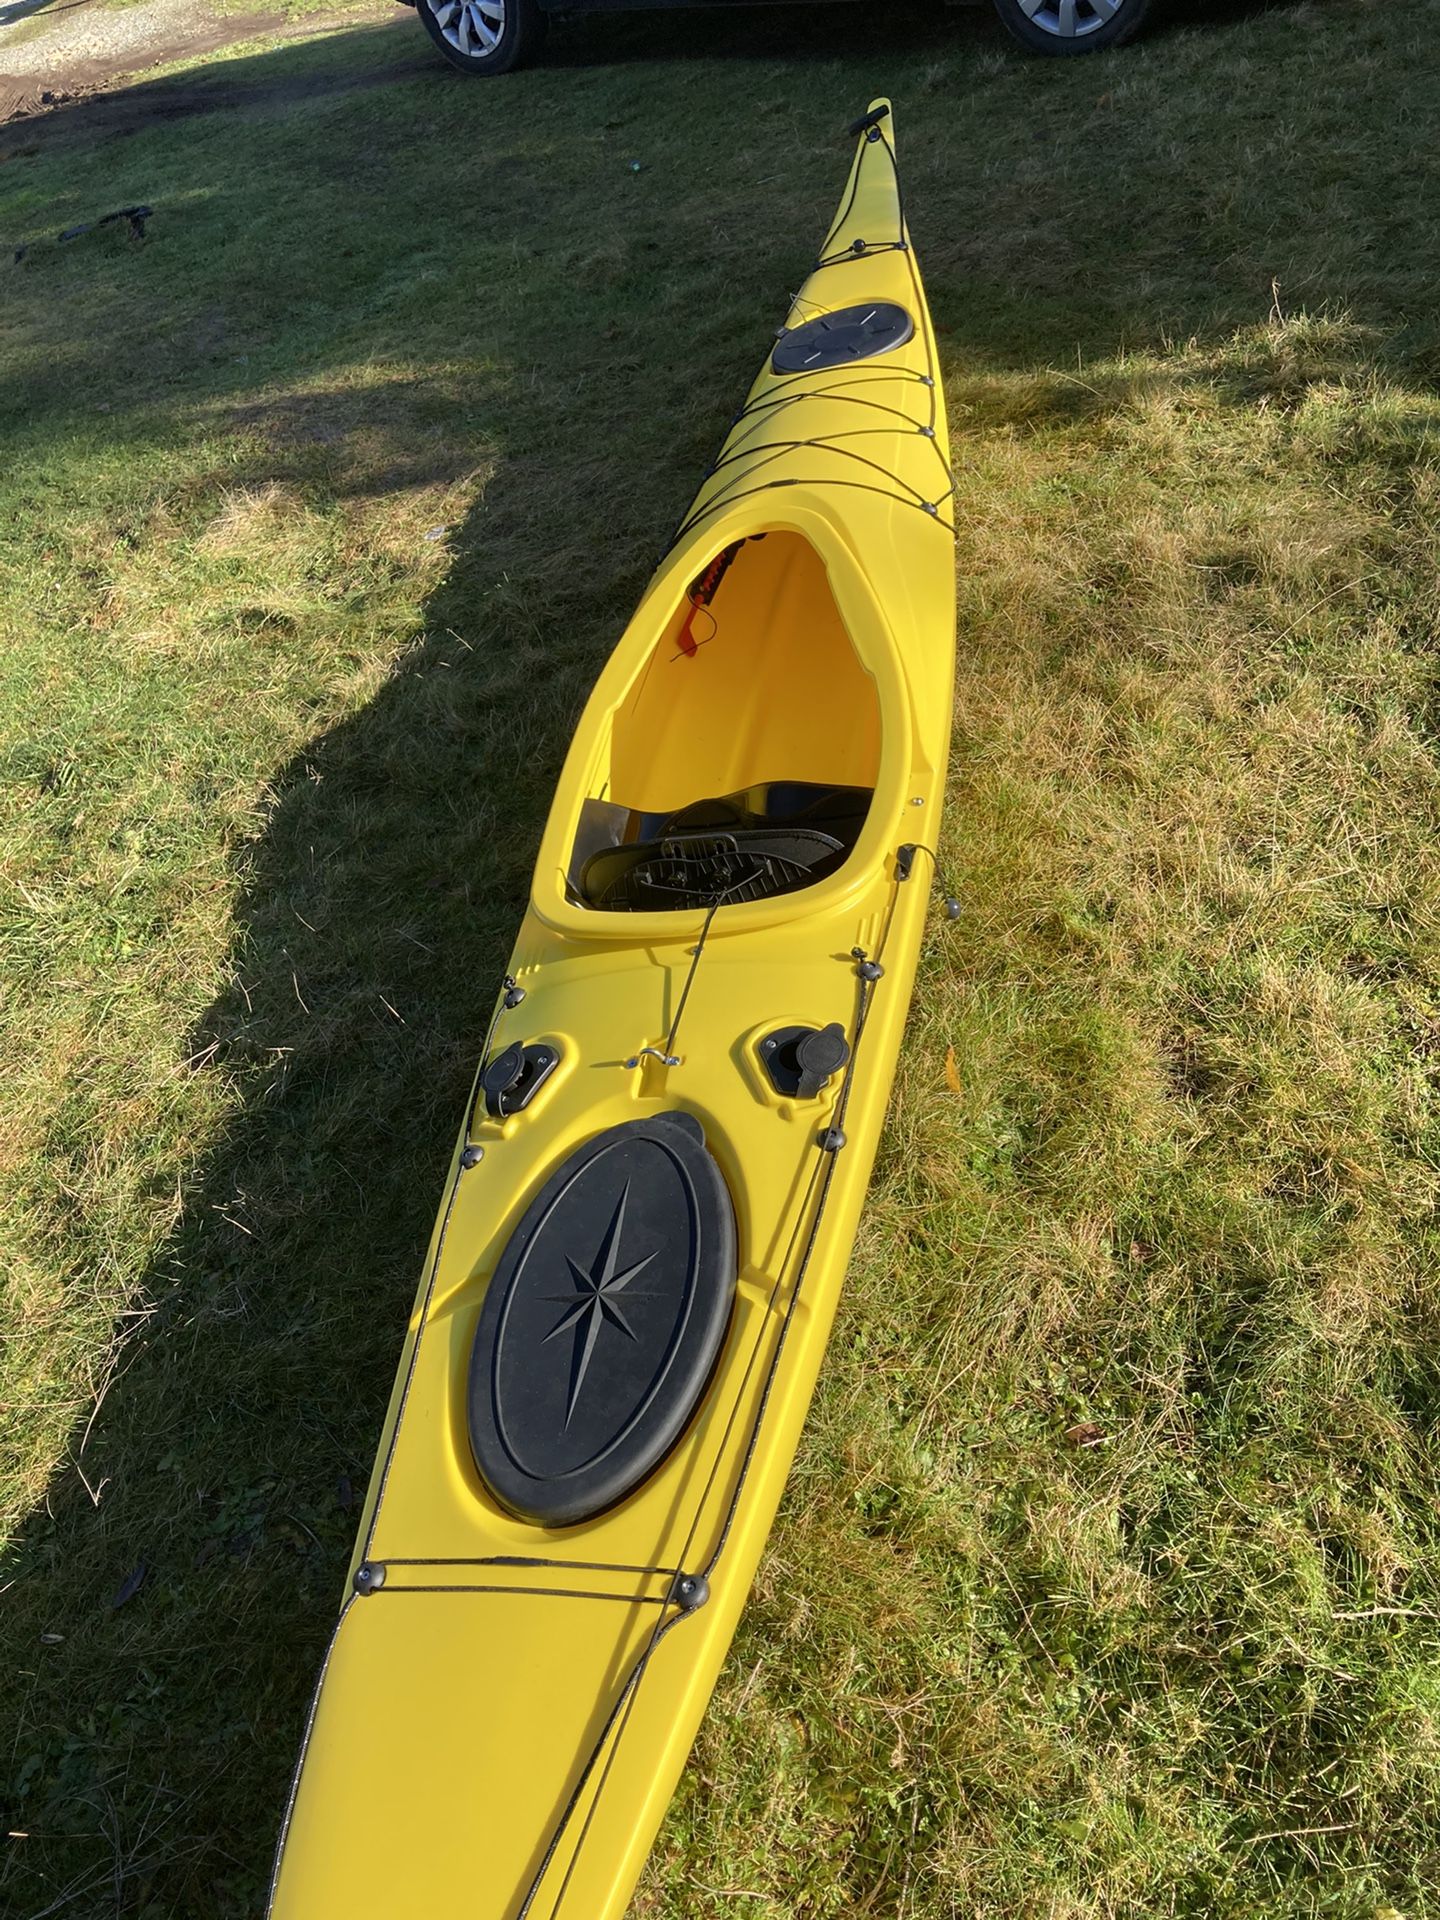 15ft Touring Kayak – Solo Distance Travel Kayak ,Collapsible Paddle Included